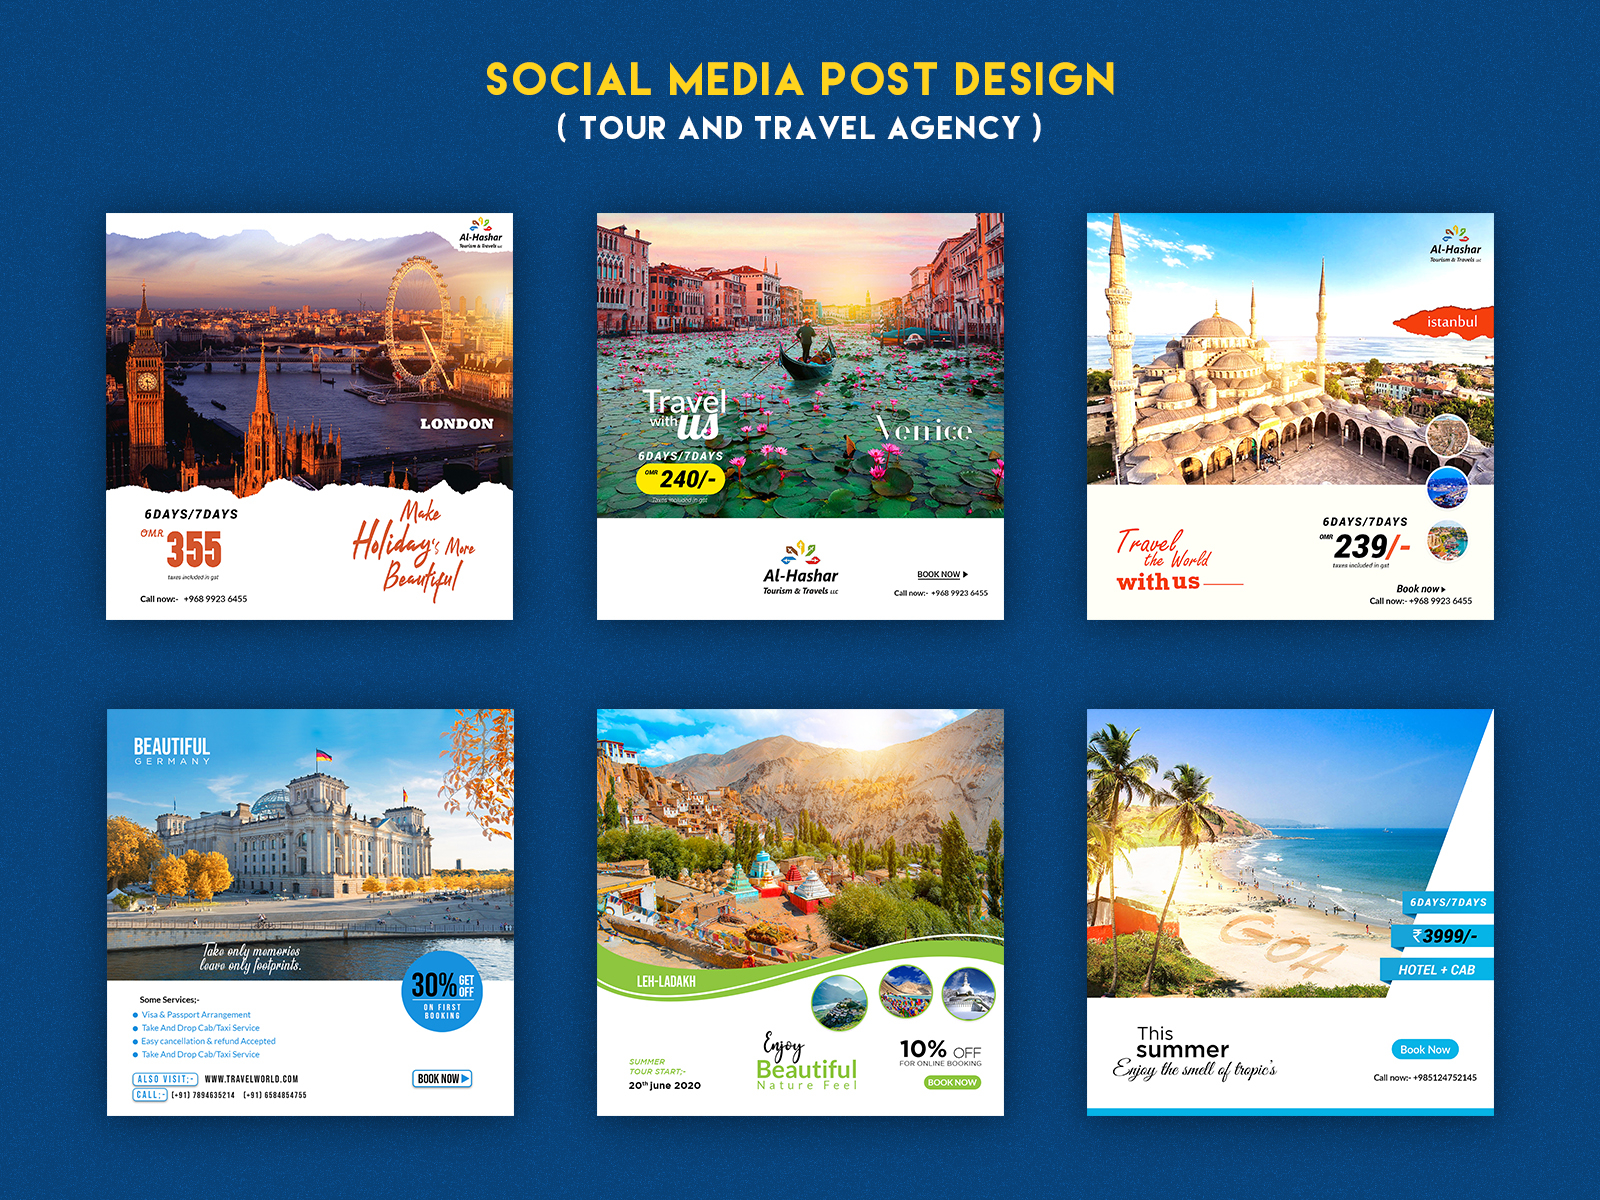 Tour And Travel Agency Social Media Post Design 2020 by Rahul Dhasmana